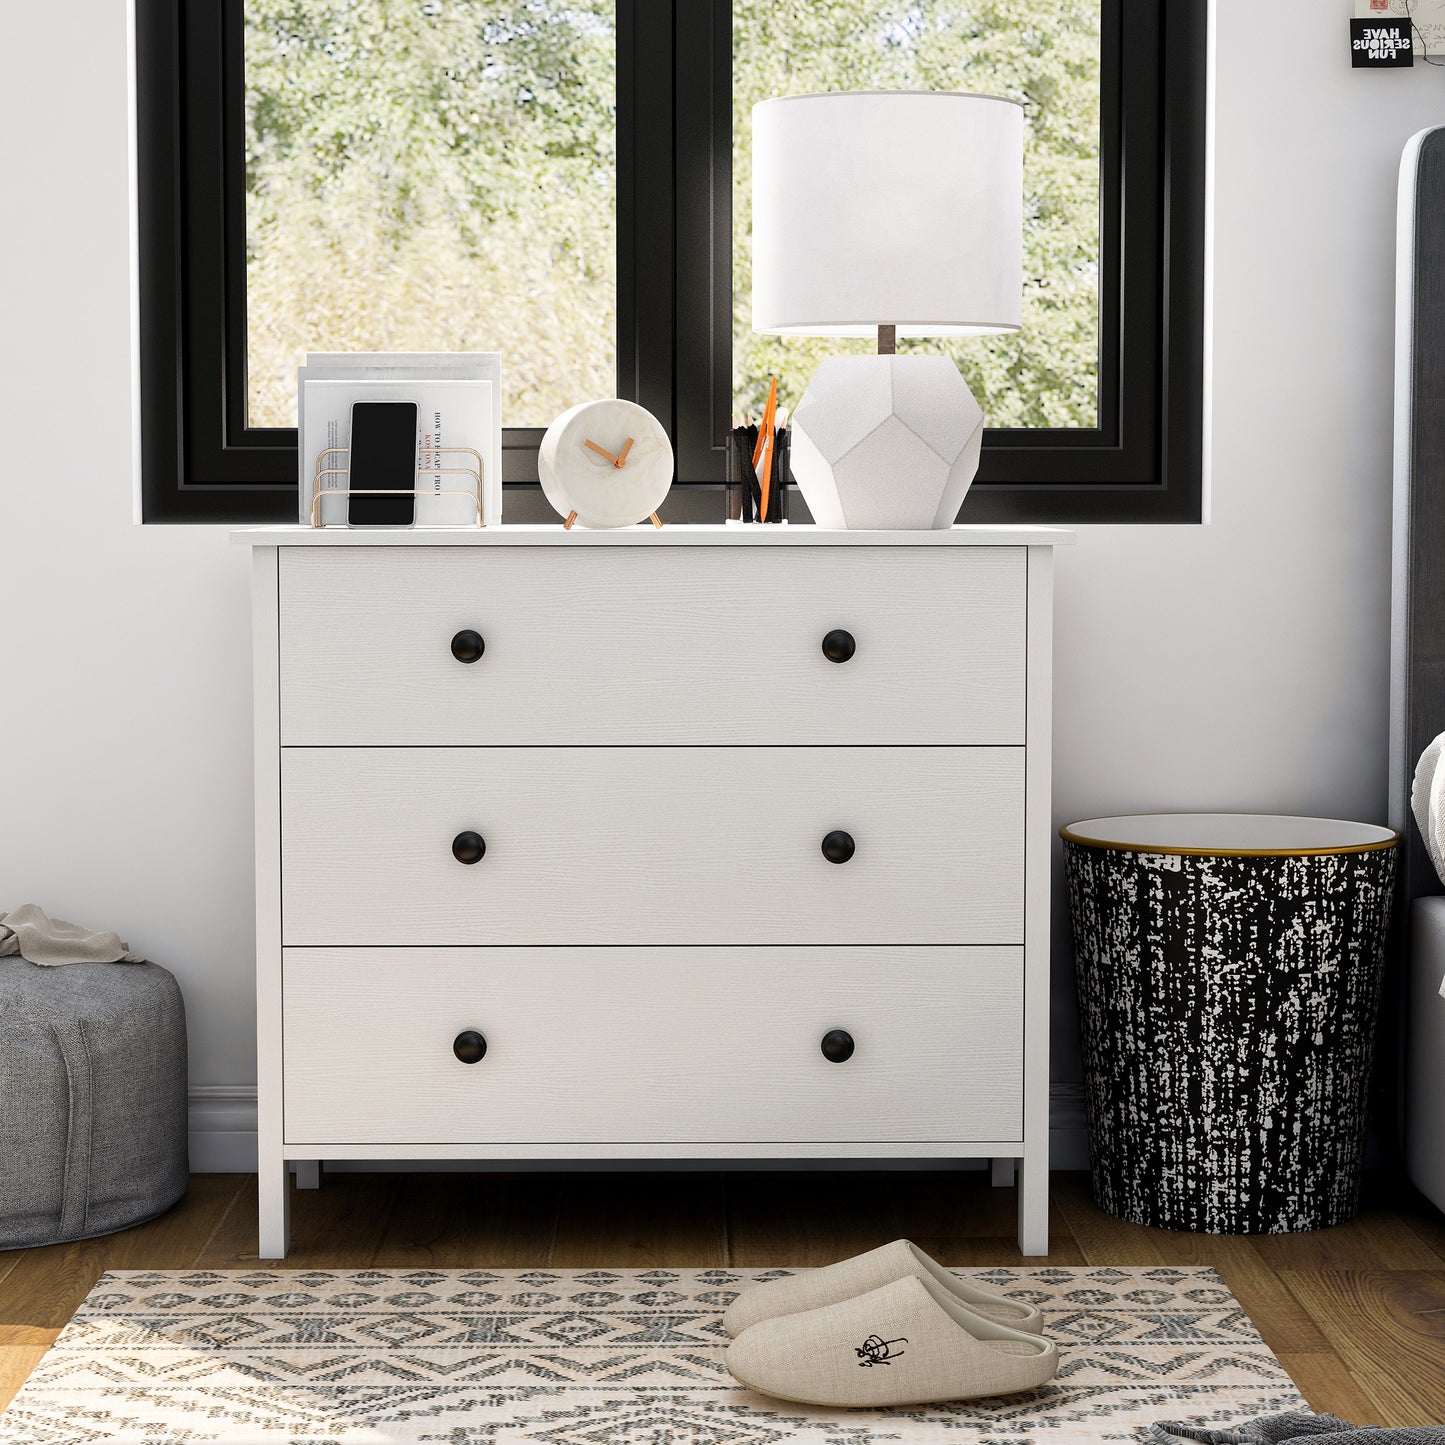 Front-facing transitional white three-drawer youth dresser in a bedroom with accessories